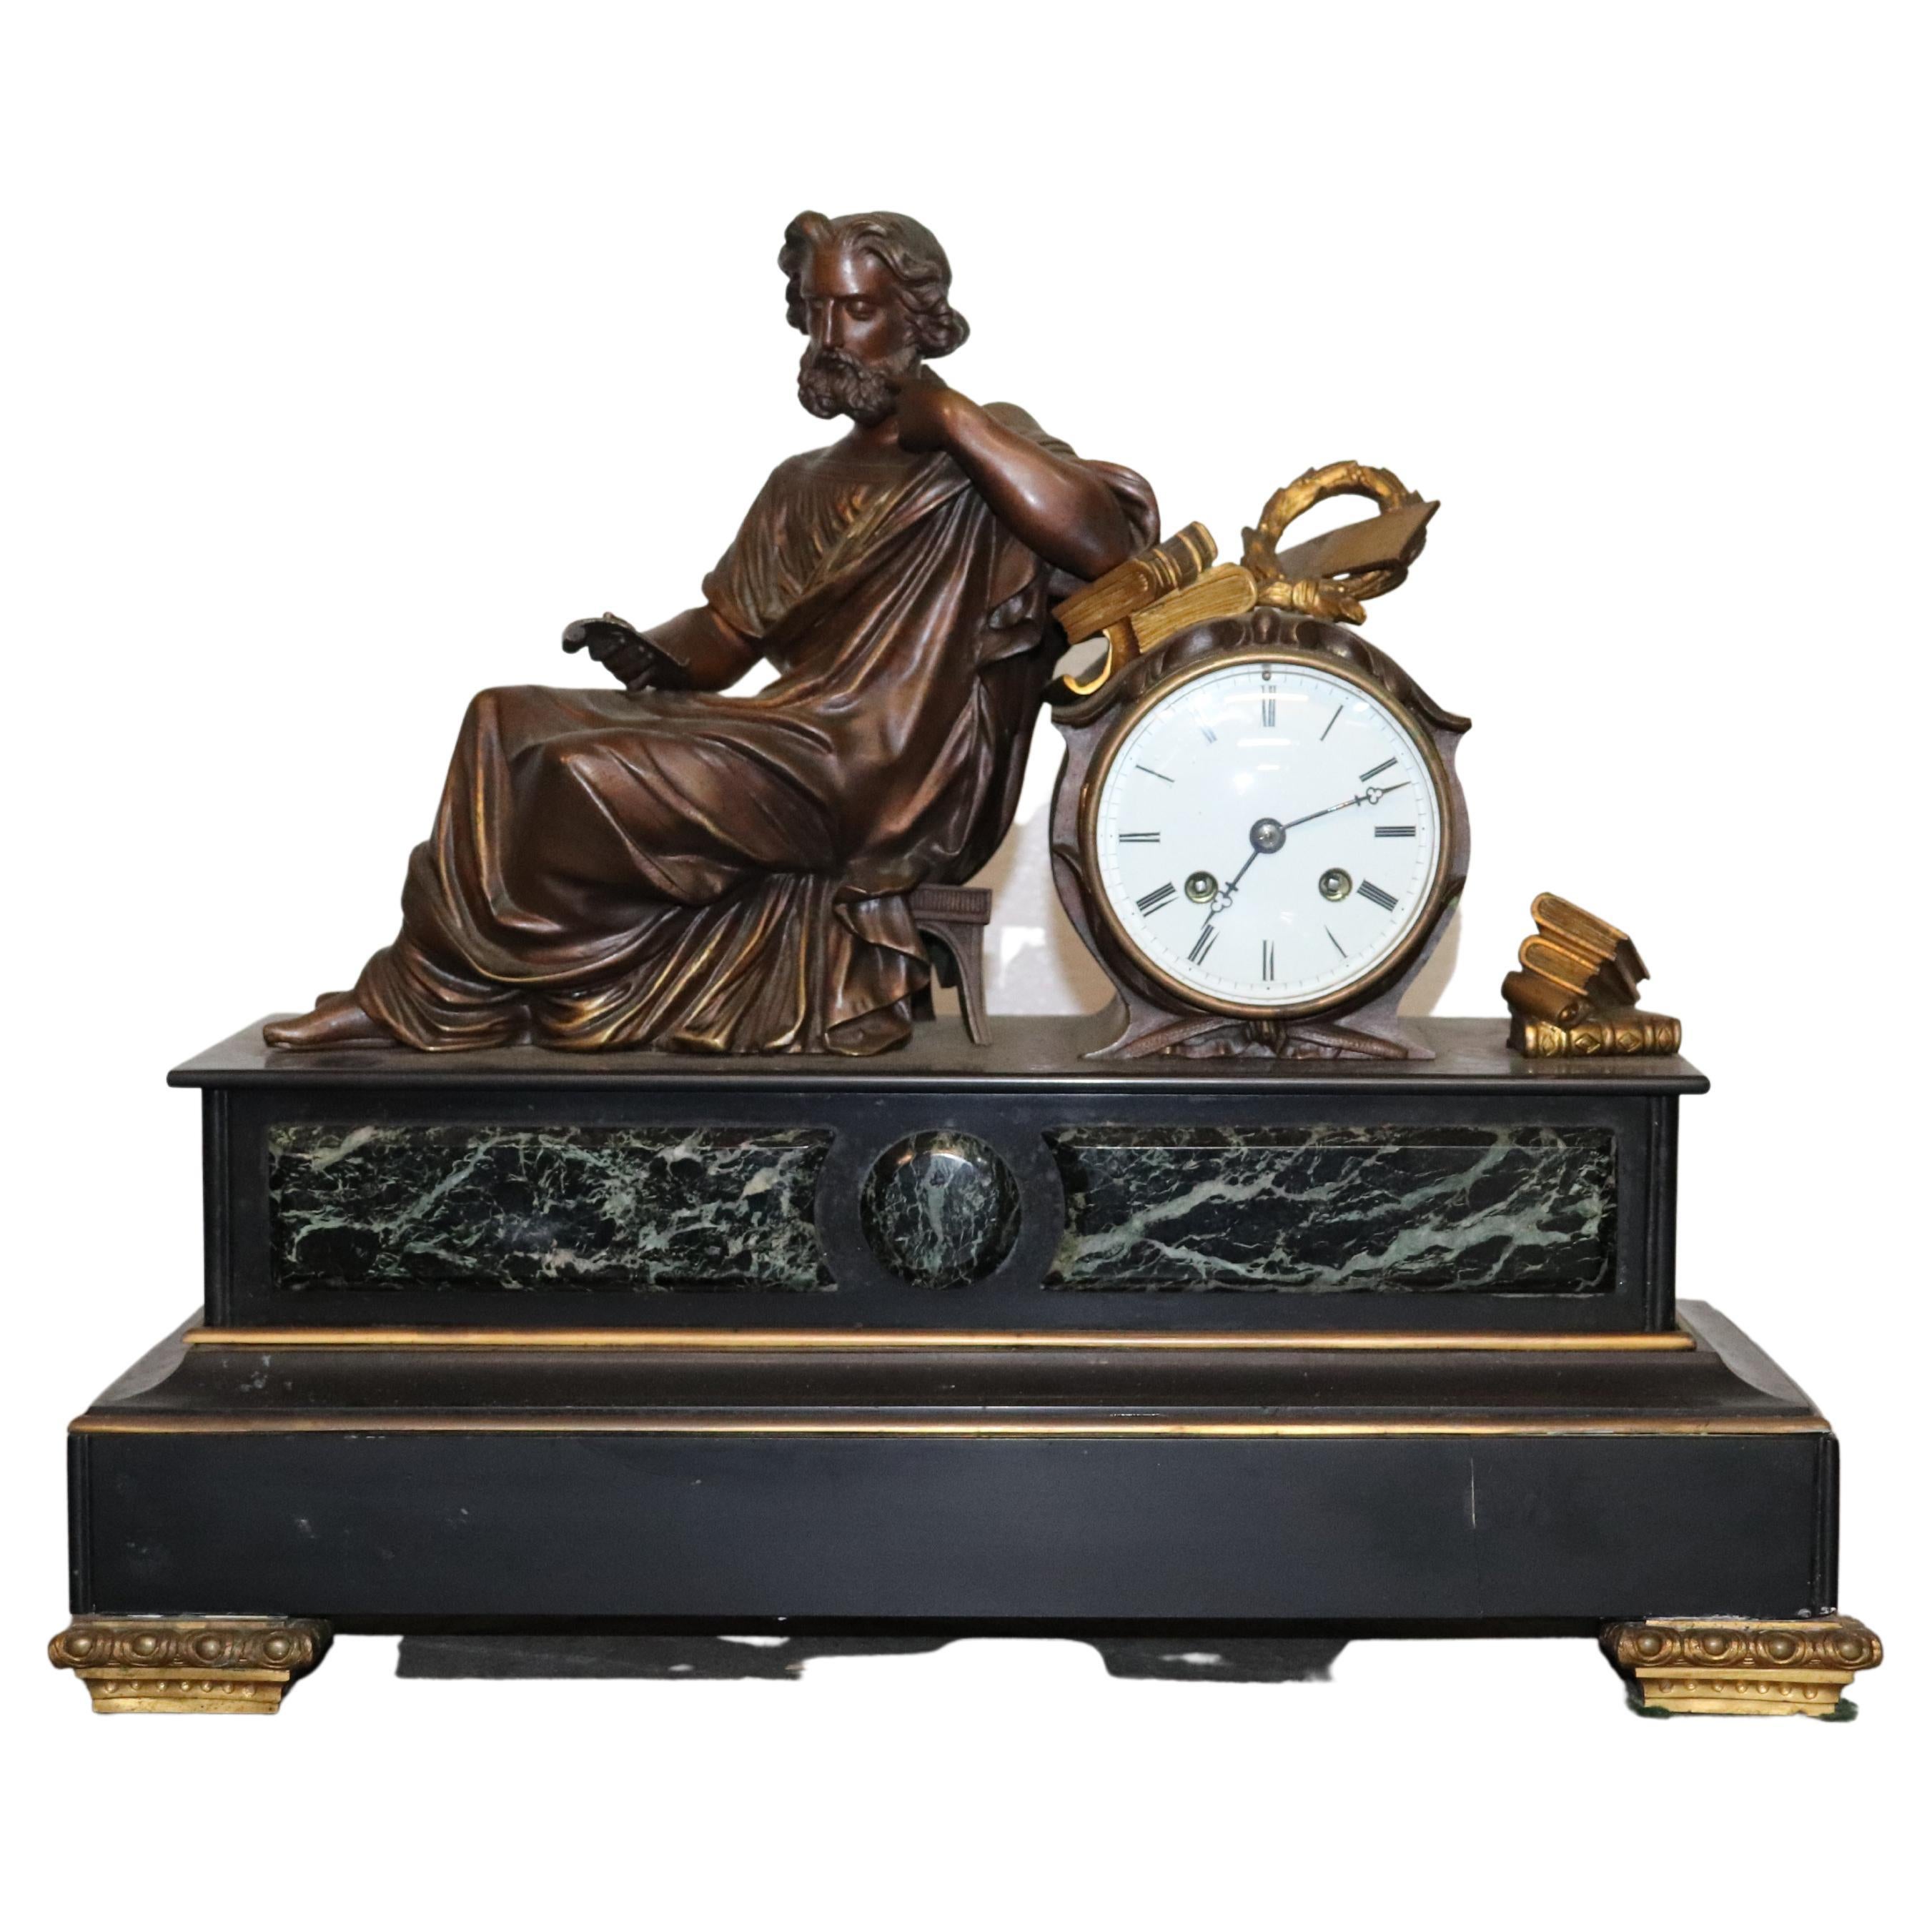 Fine French Verdi Marble and Bronze Mantel Clock of an Enrobed Wise Old Scholar